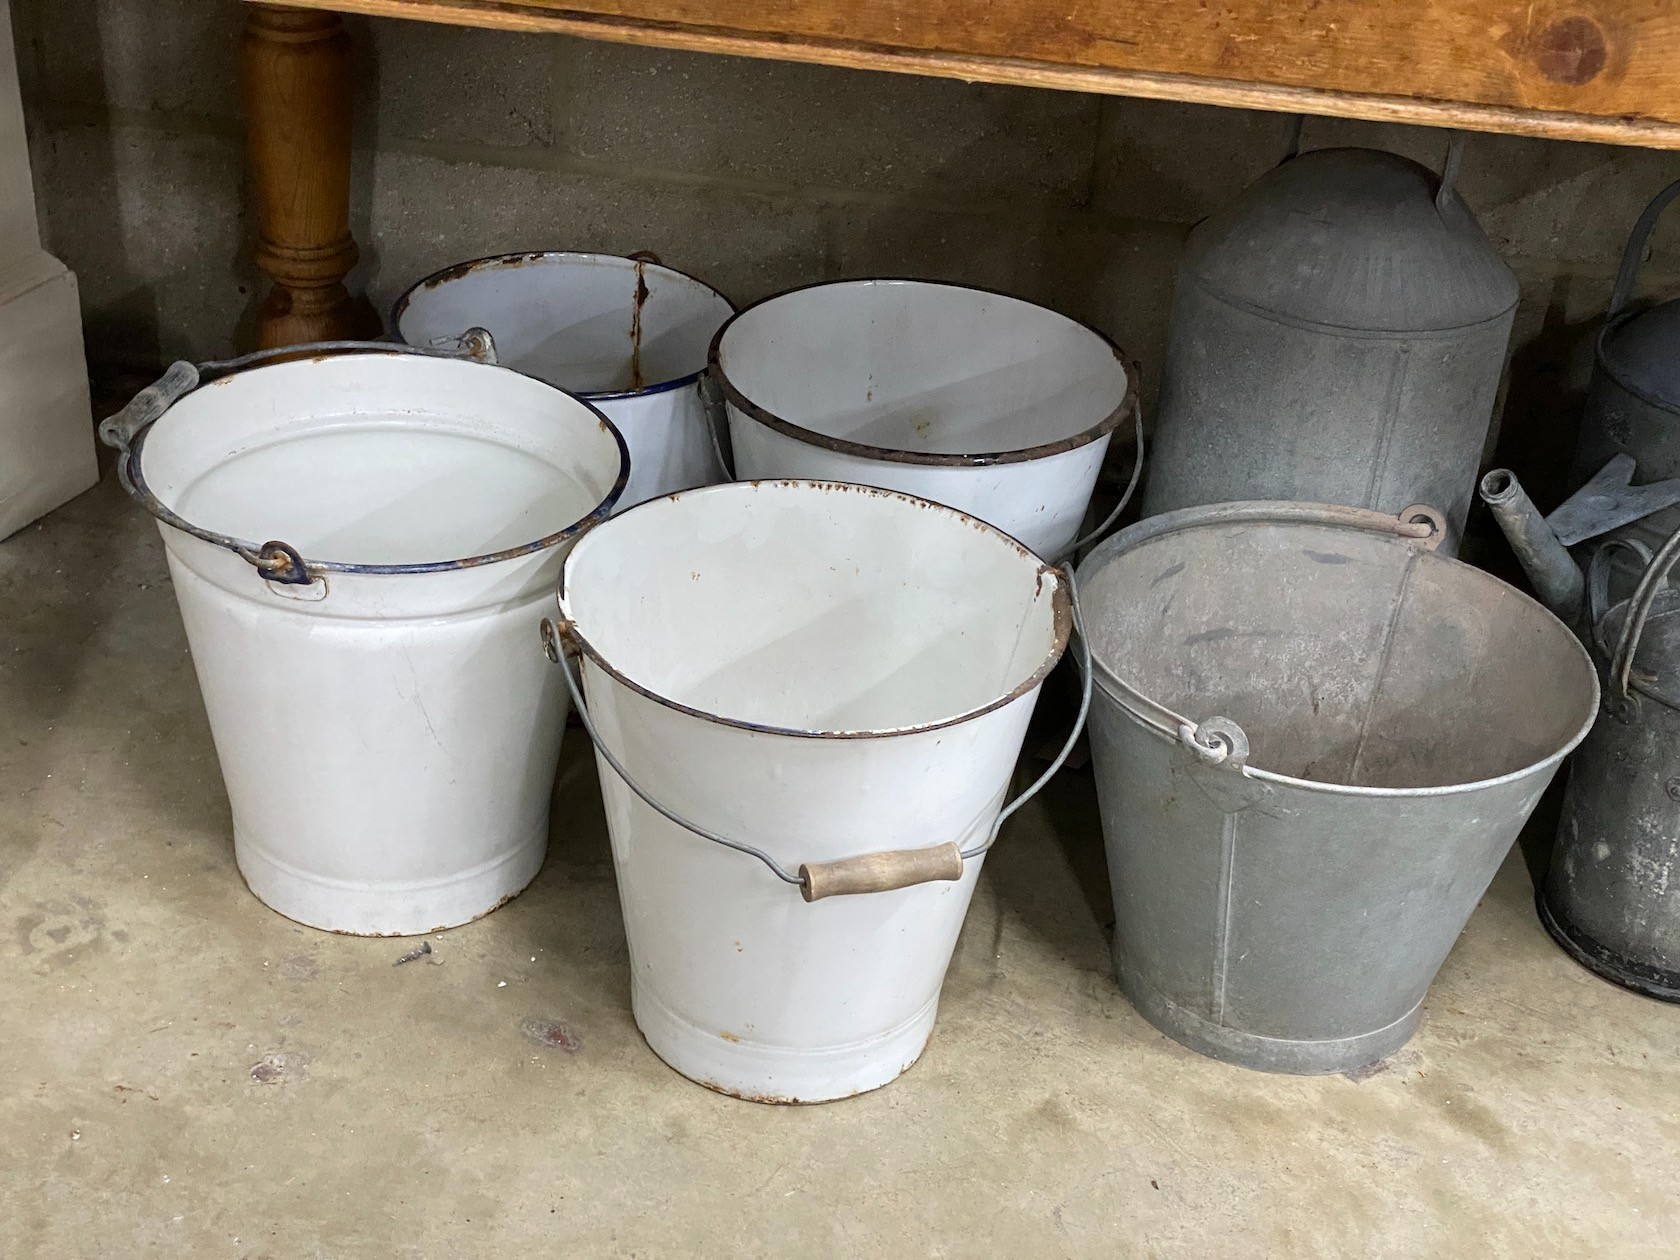 Ten galvanised and enamelled buckets, watering cans and feeder                                                                                                                                                              